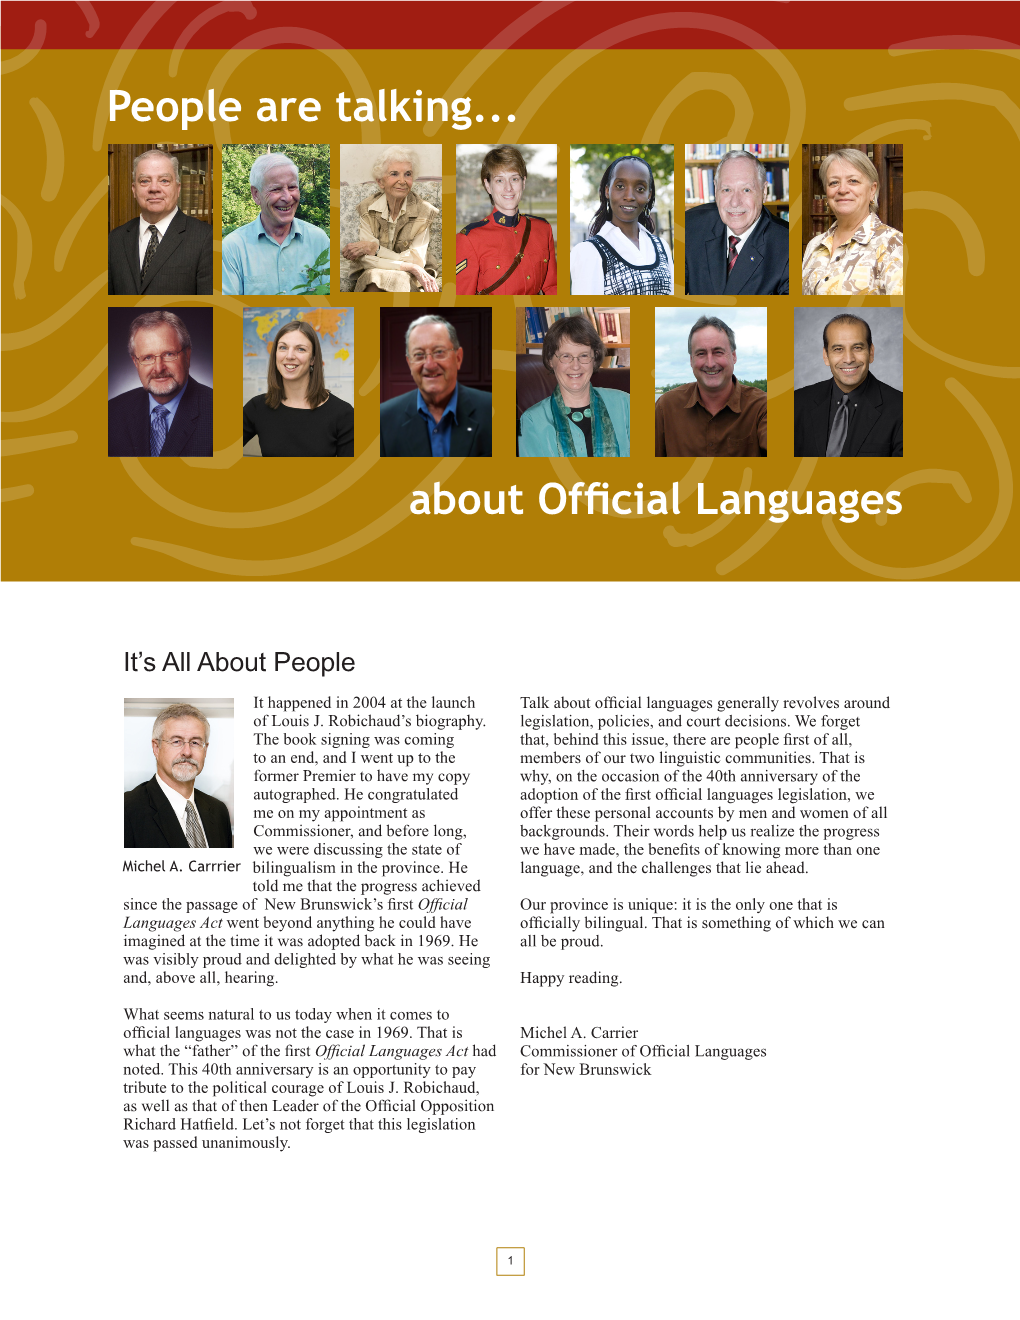 People Are Talking... About Official Languages Was Produced in St